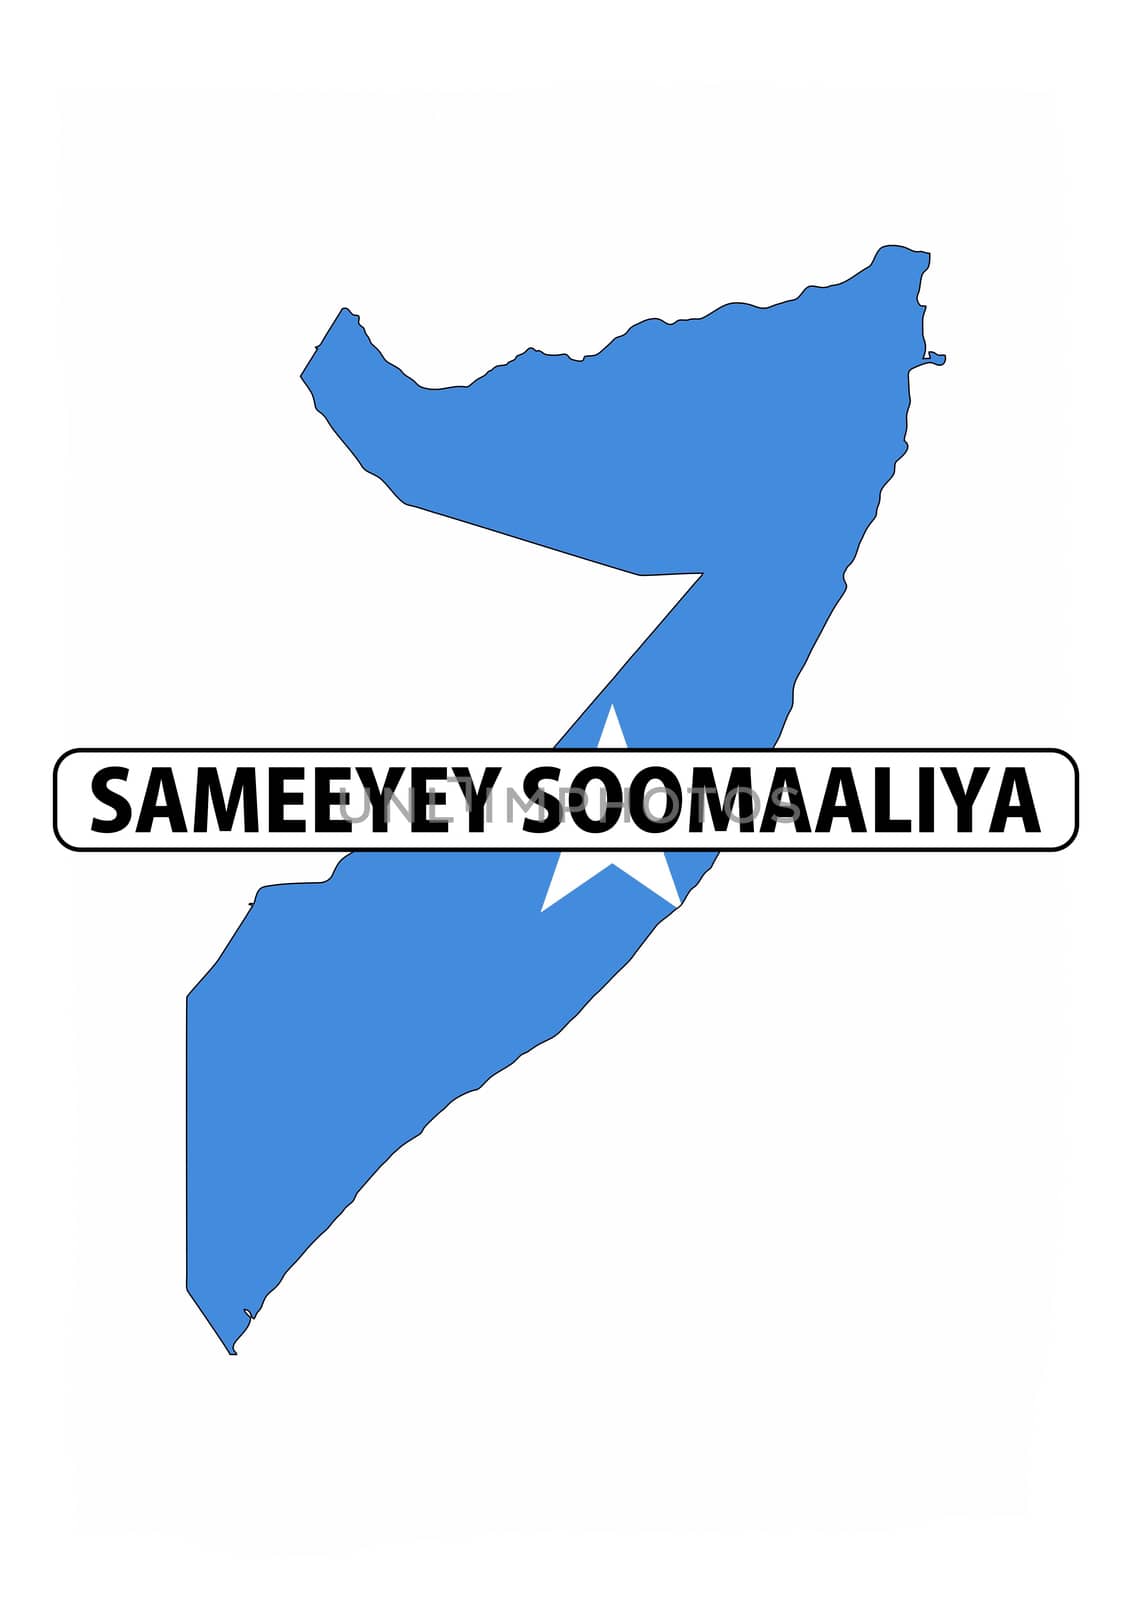 made in somalia country national flag map shape with text